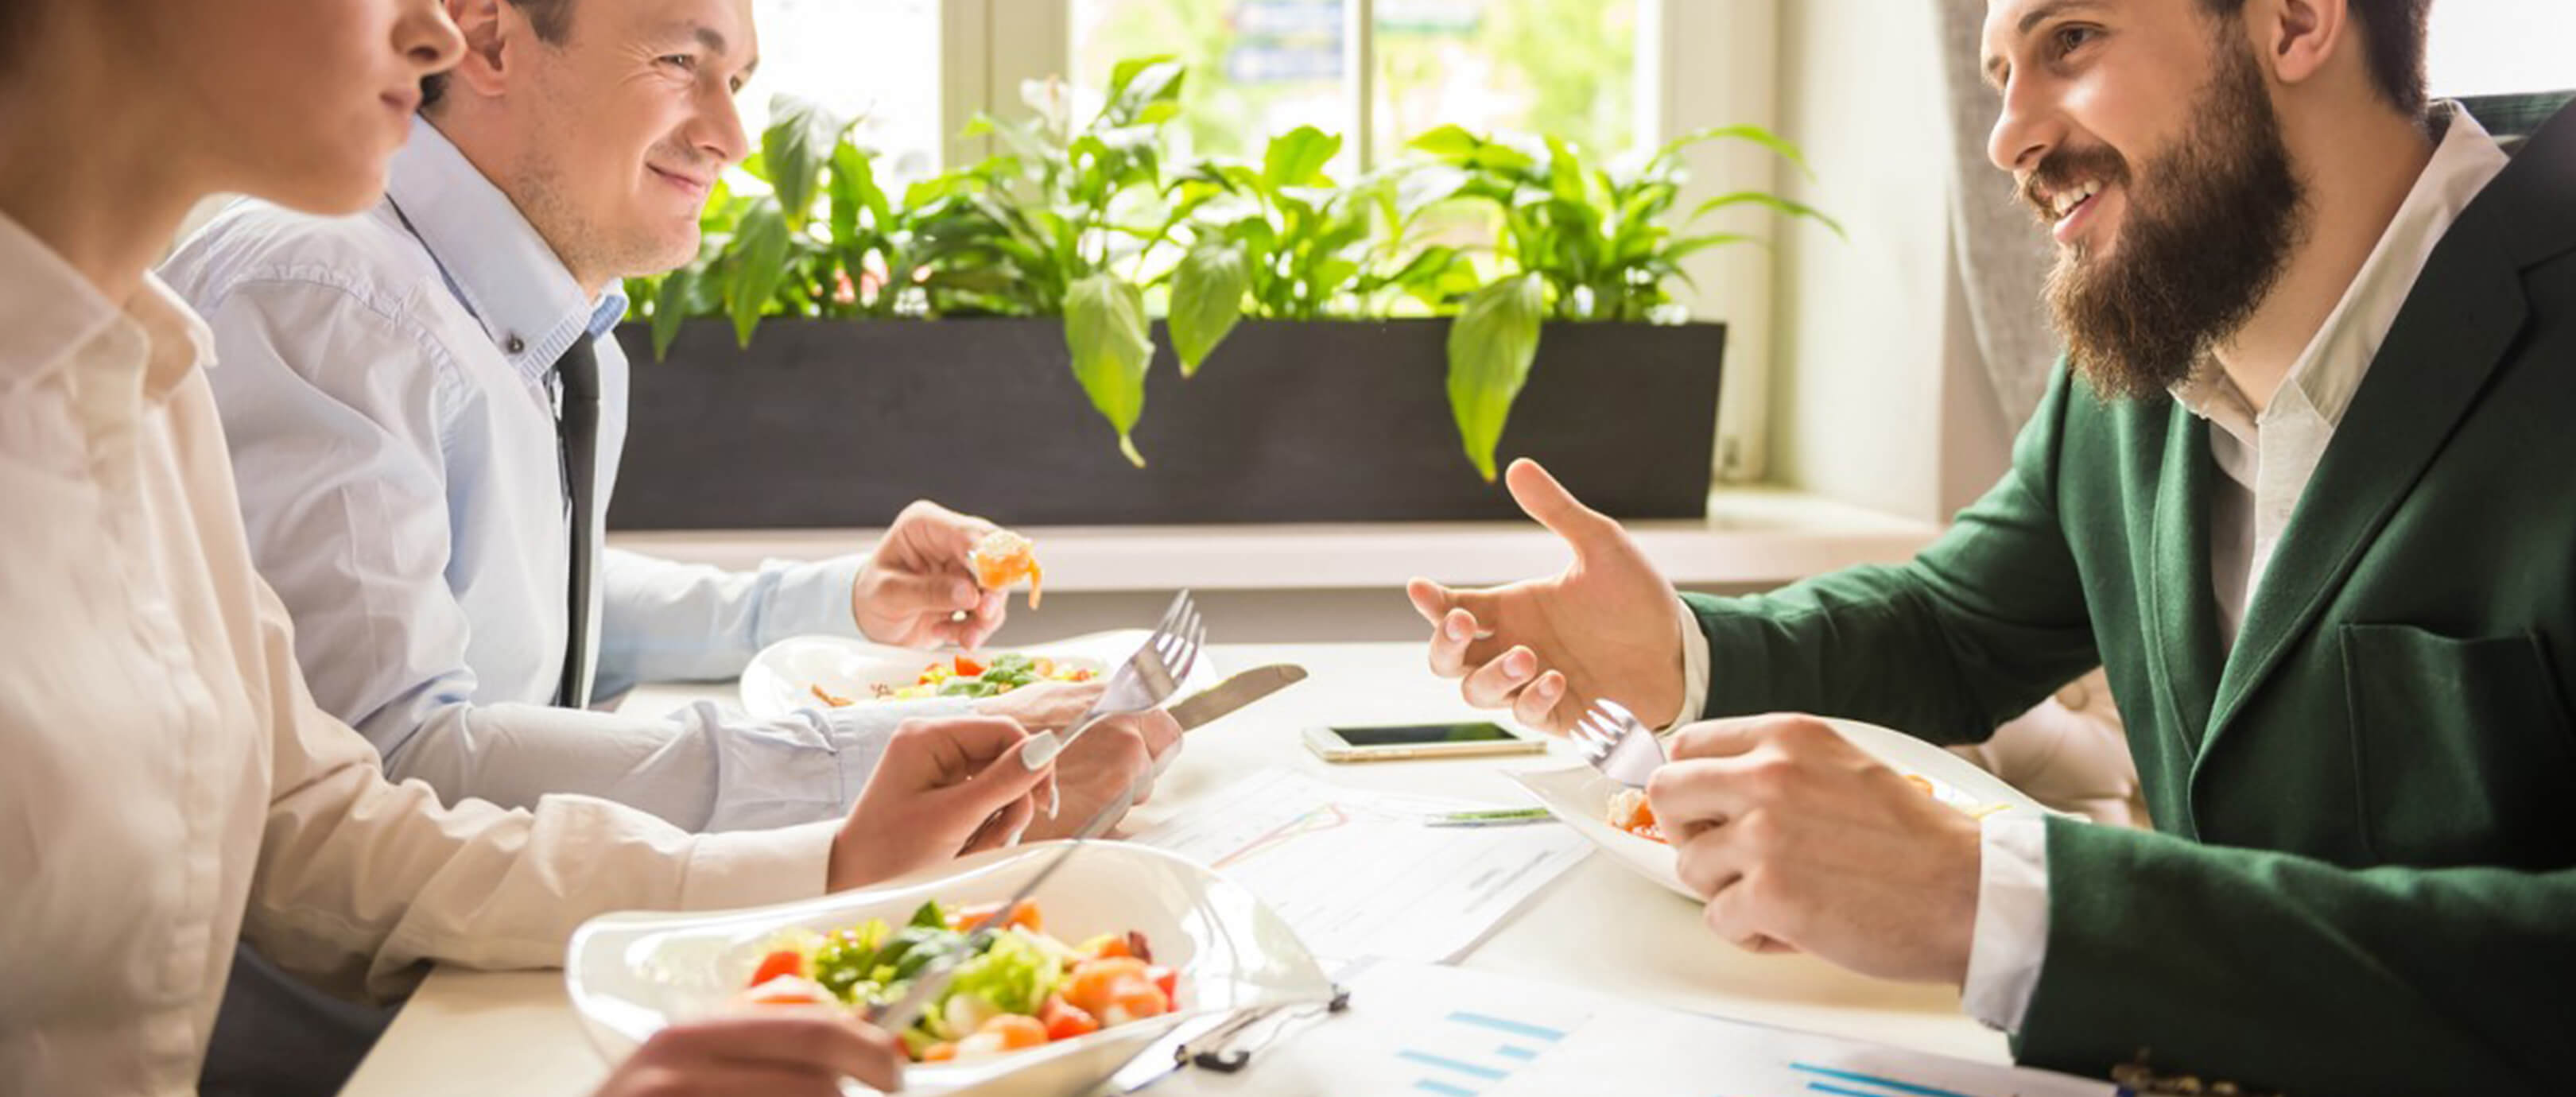 Power Lunch: How to Ace Business Meetings over Meals